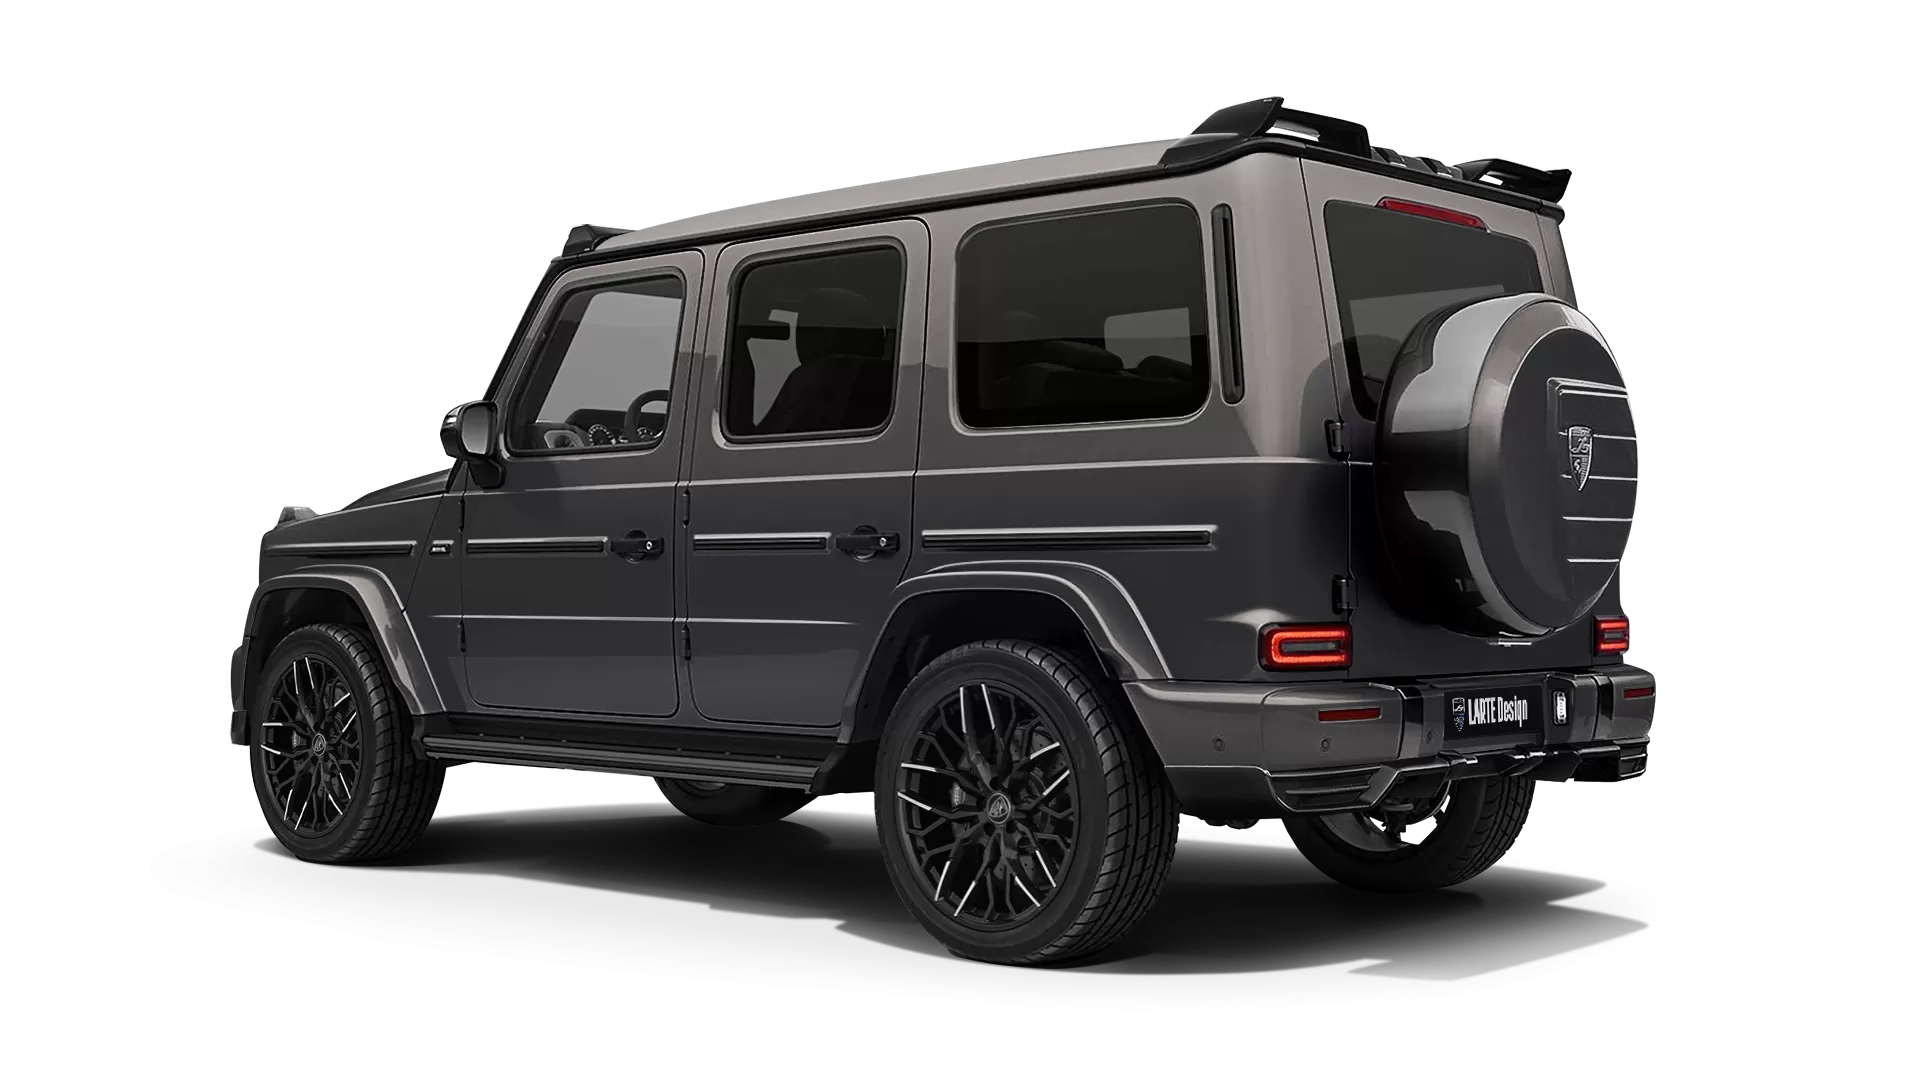 Mercedes G class W463 with painted body kit: rear view shown in Indium Grey